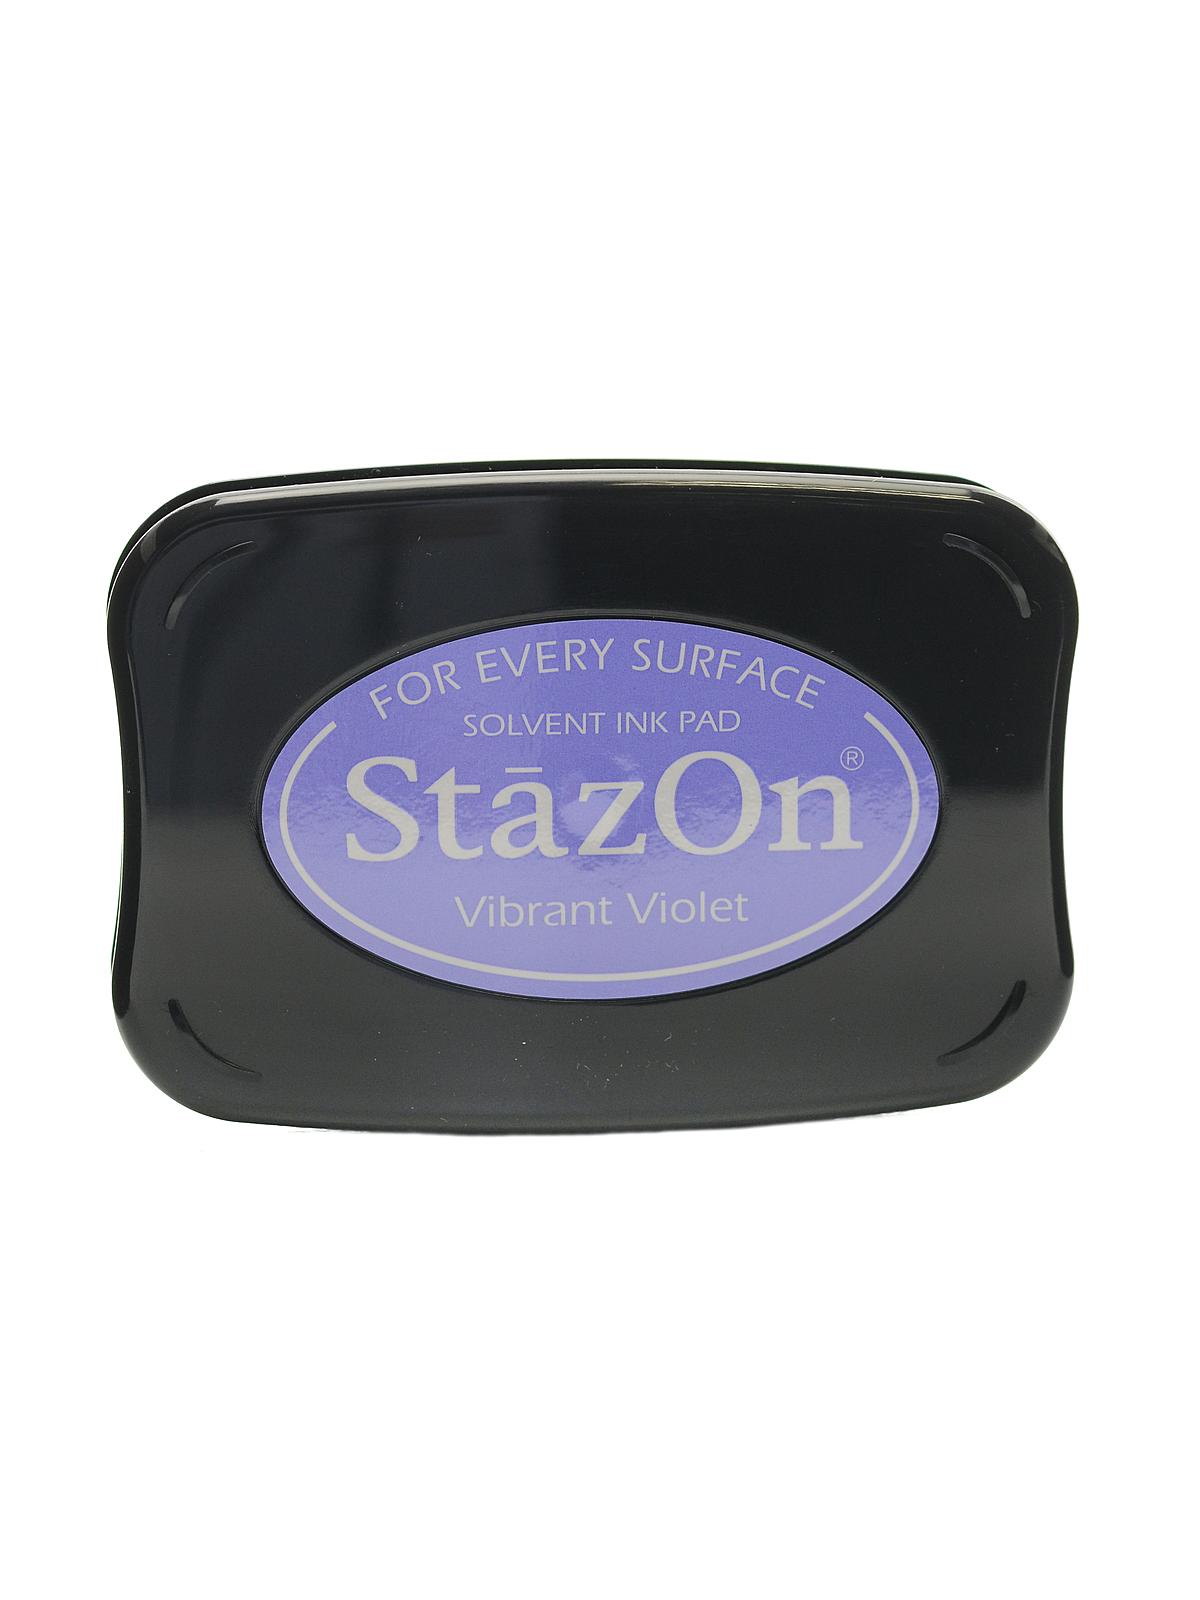 Stazon Solvent Ink Vibrant Violet 3.75 In. X 2.625 In. Full-size Pad